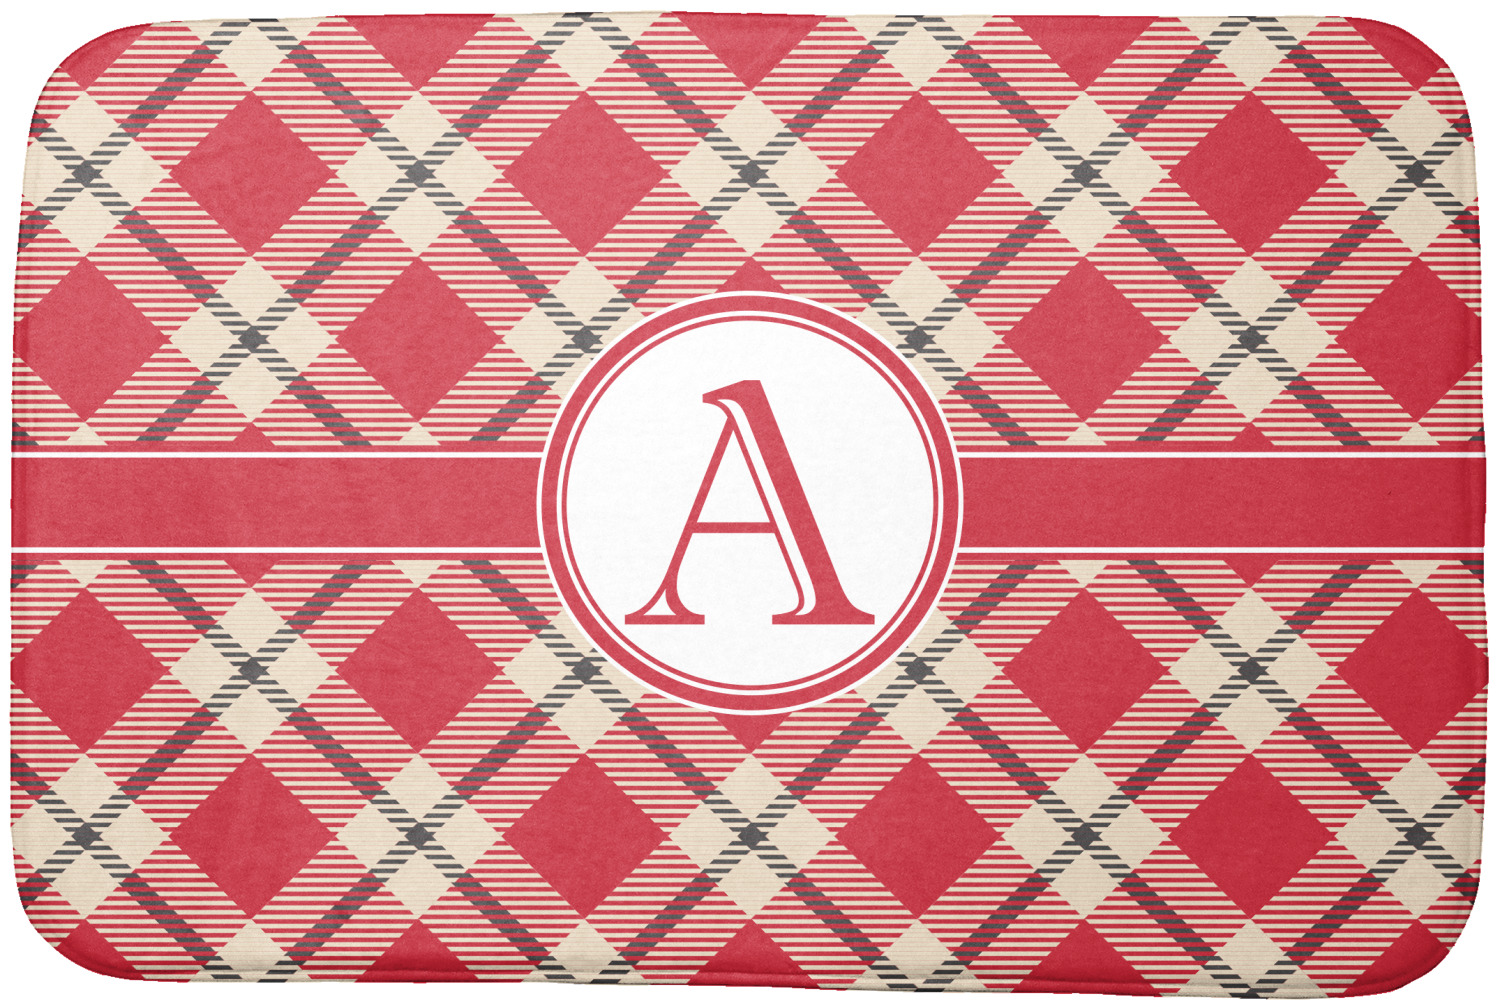 https://www.youcustomizeit.com/common/MAKE/40891/Red-Tan-Plaid-Dish-Drying-Mat-Approval.jpg?lm=1682006638